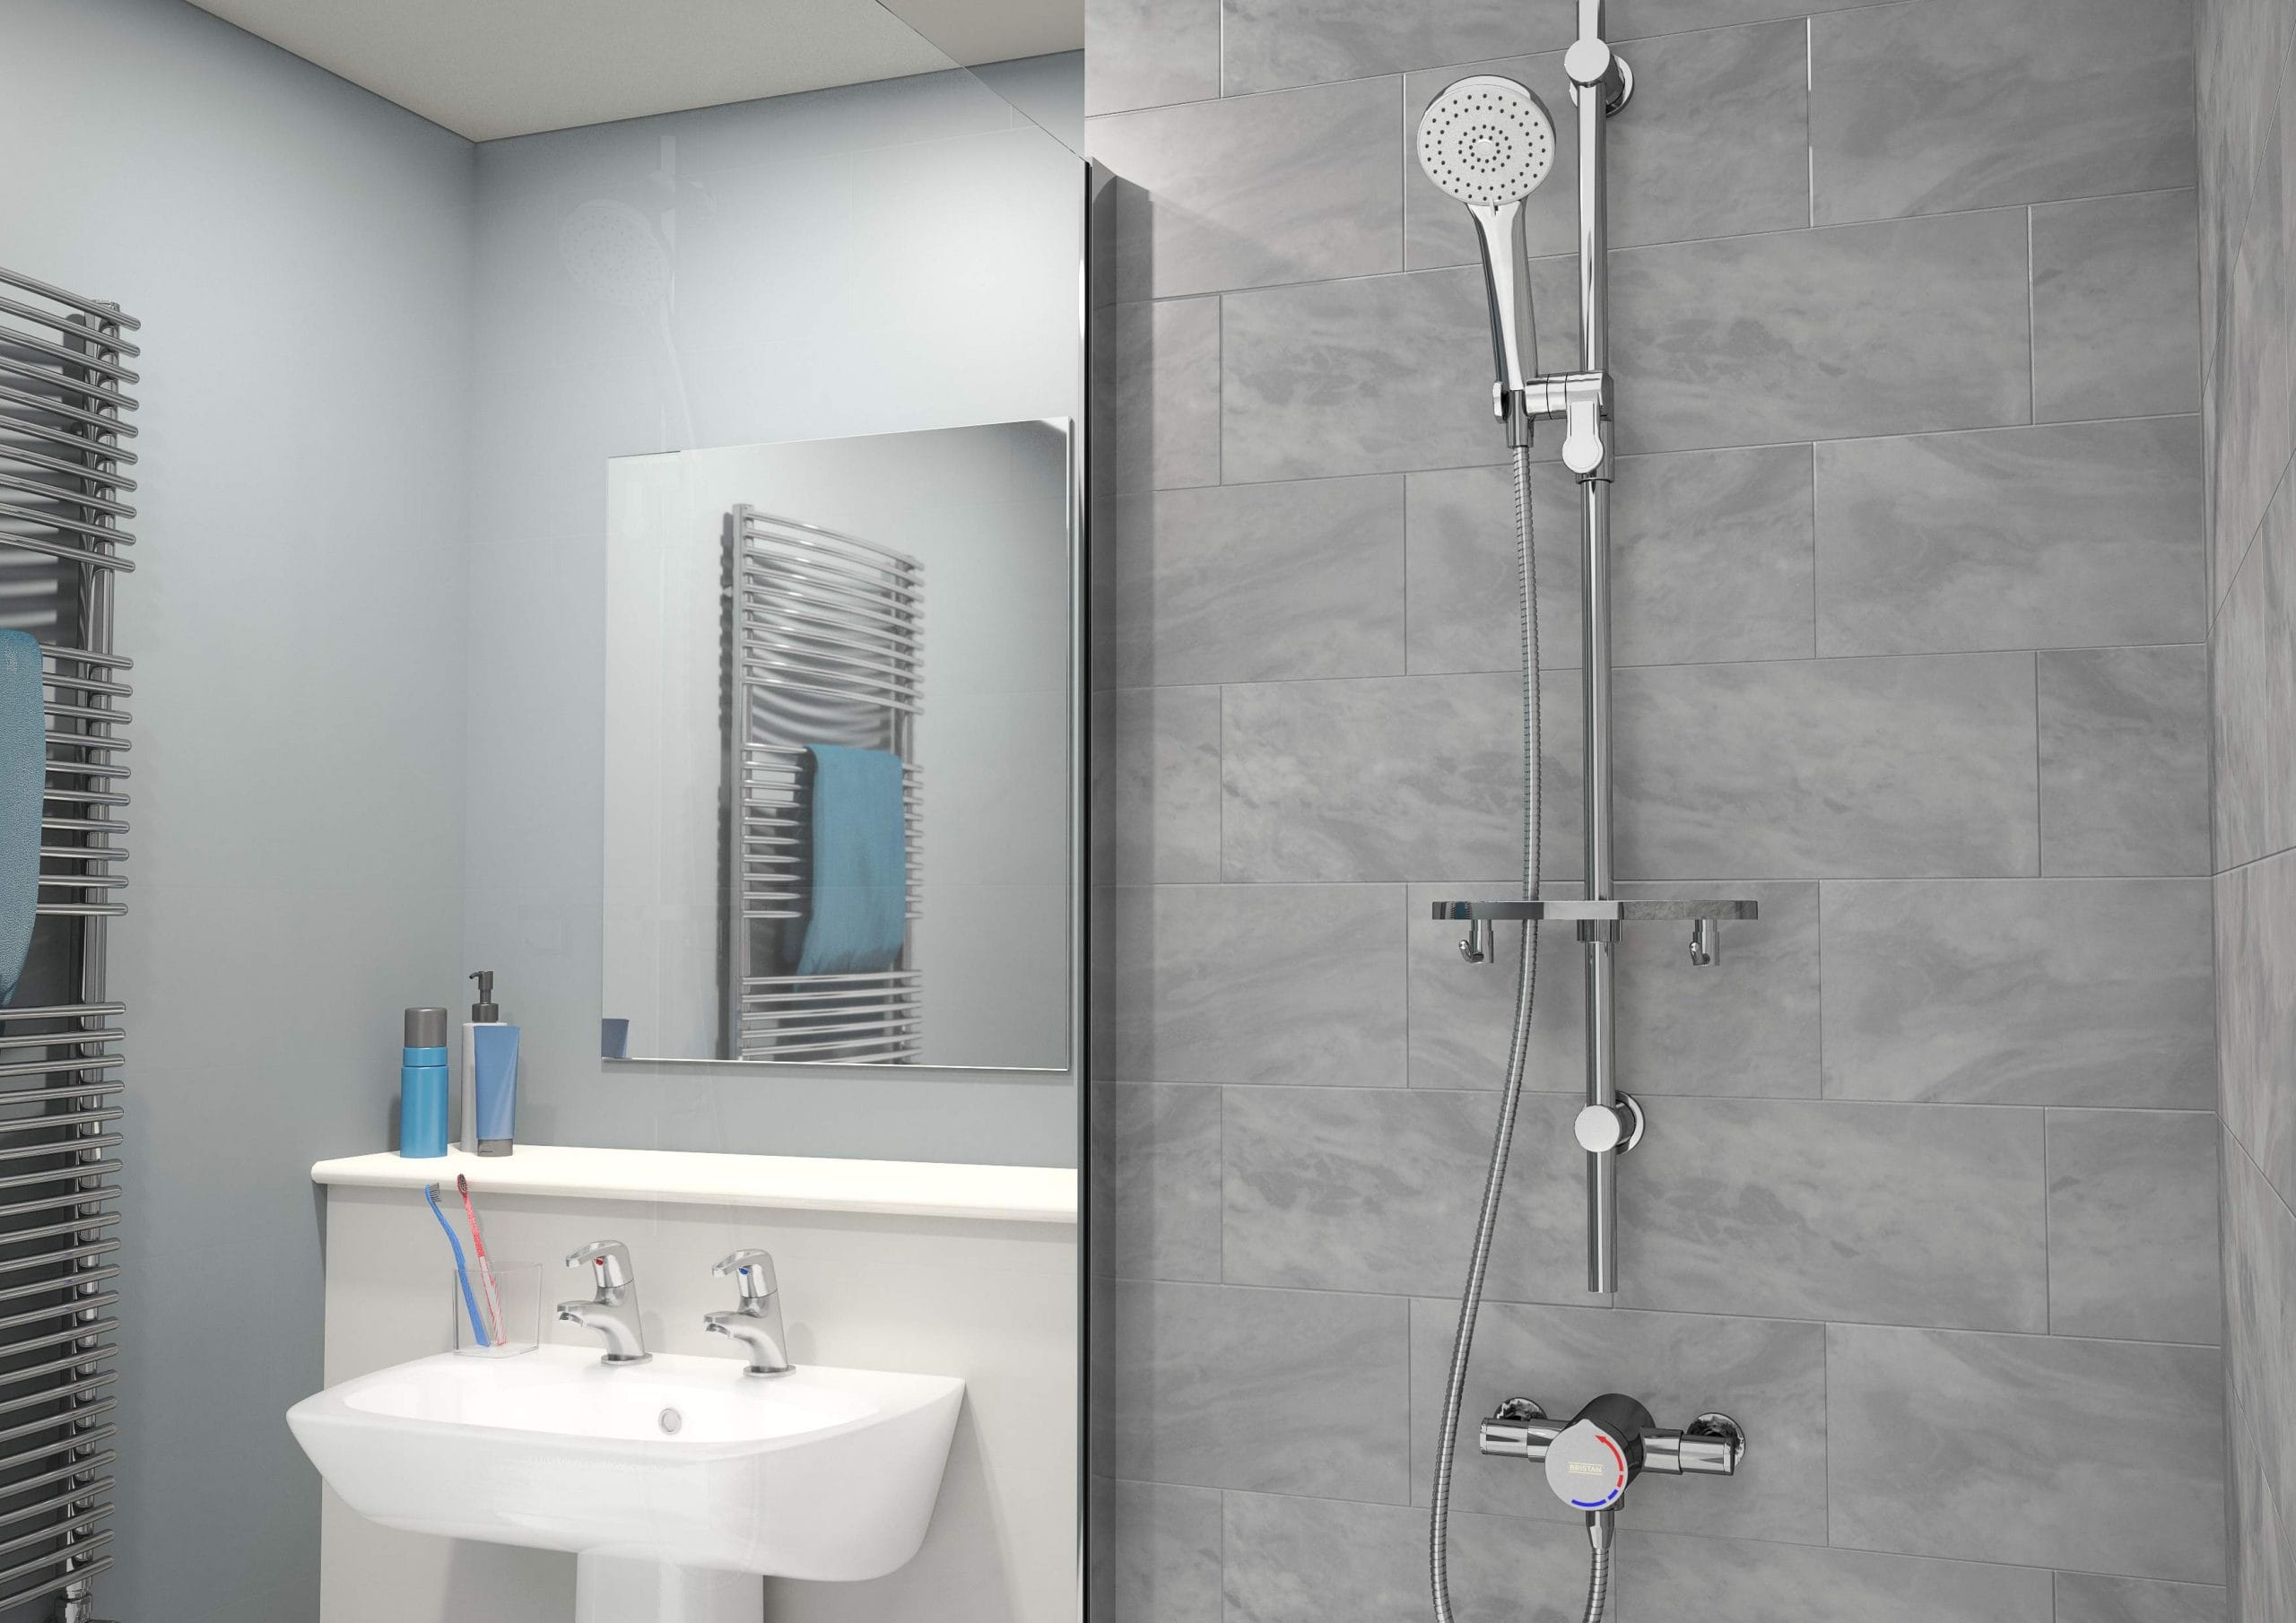 Bristan OPAC TMV3 Commercial Showers. @BristanPro @ipg_the